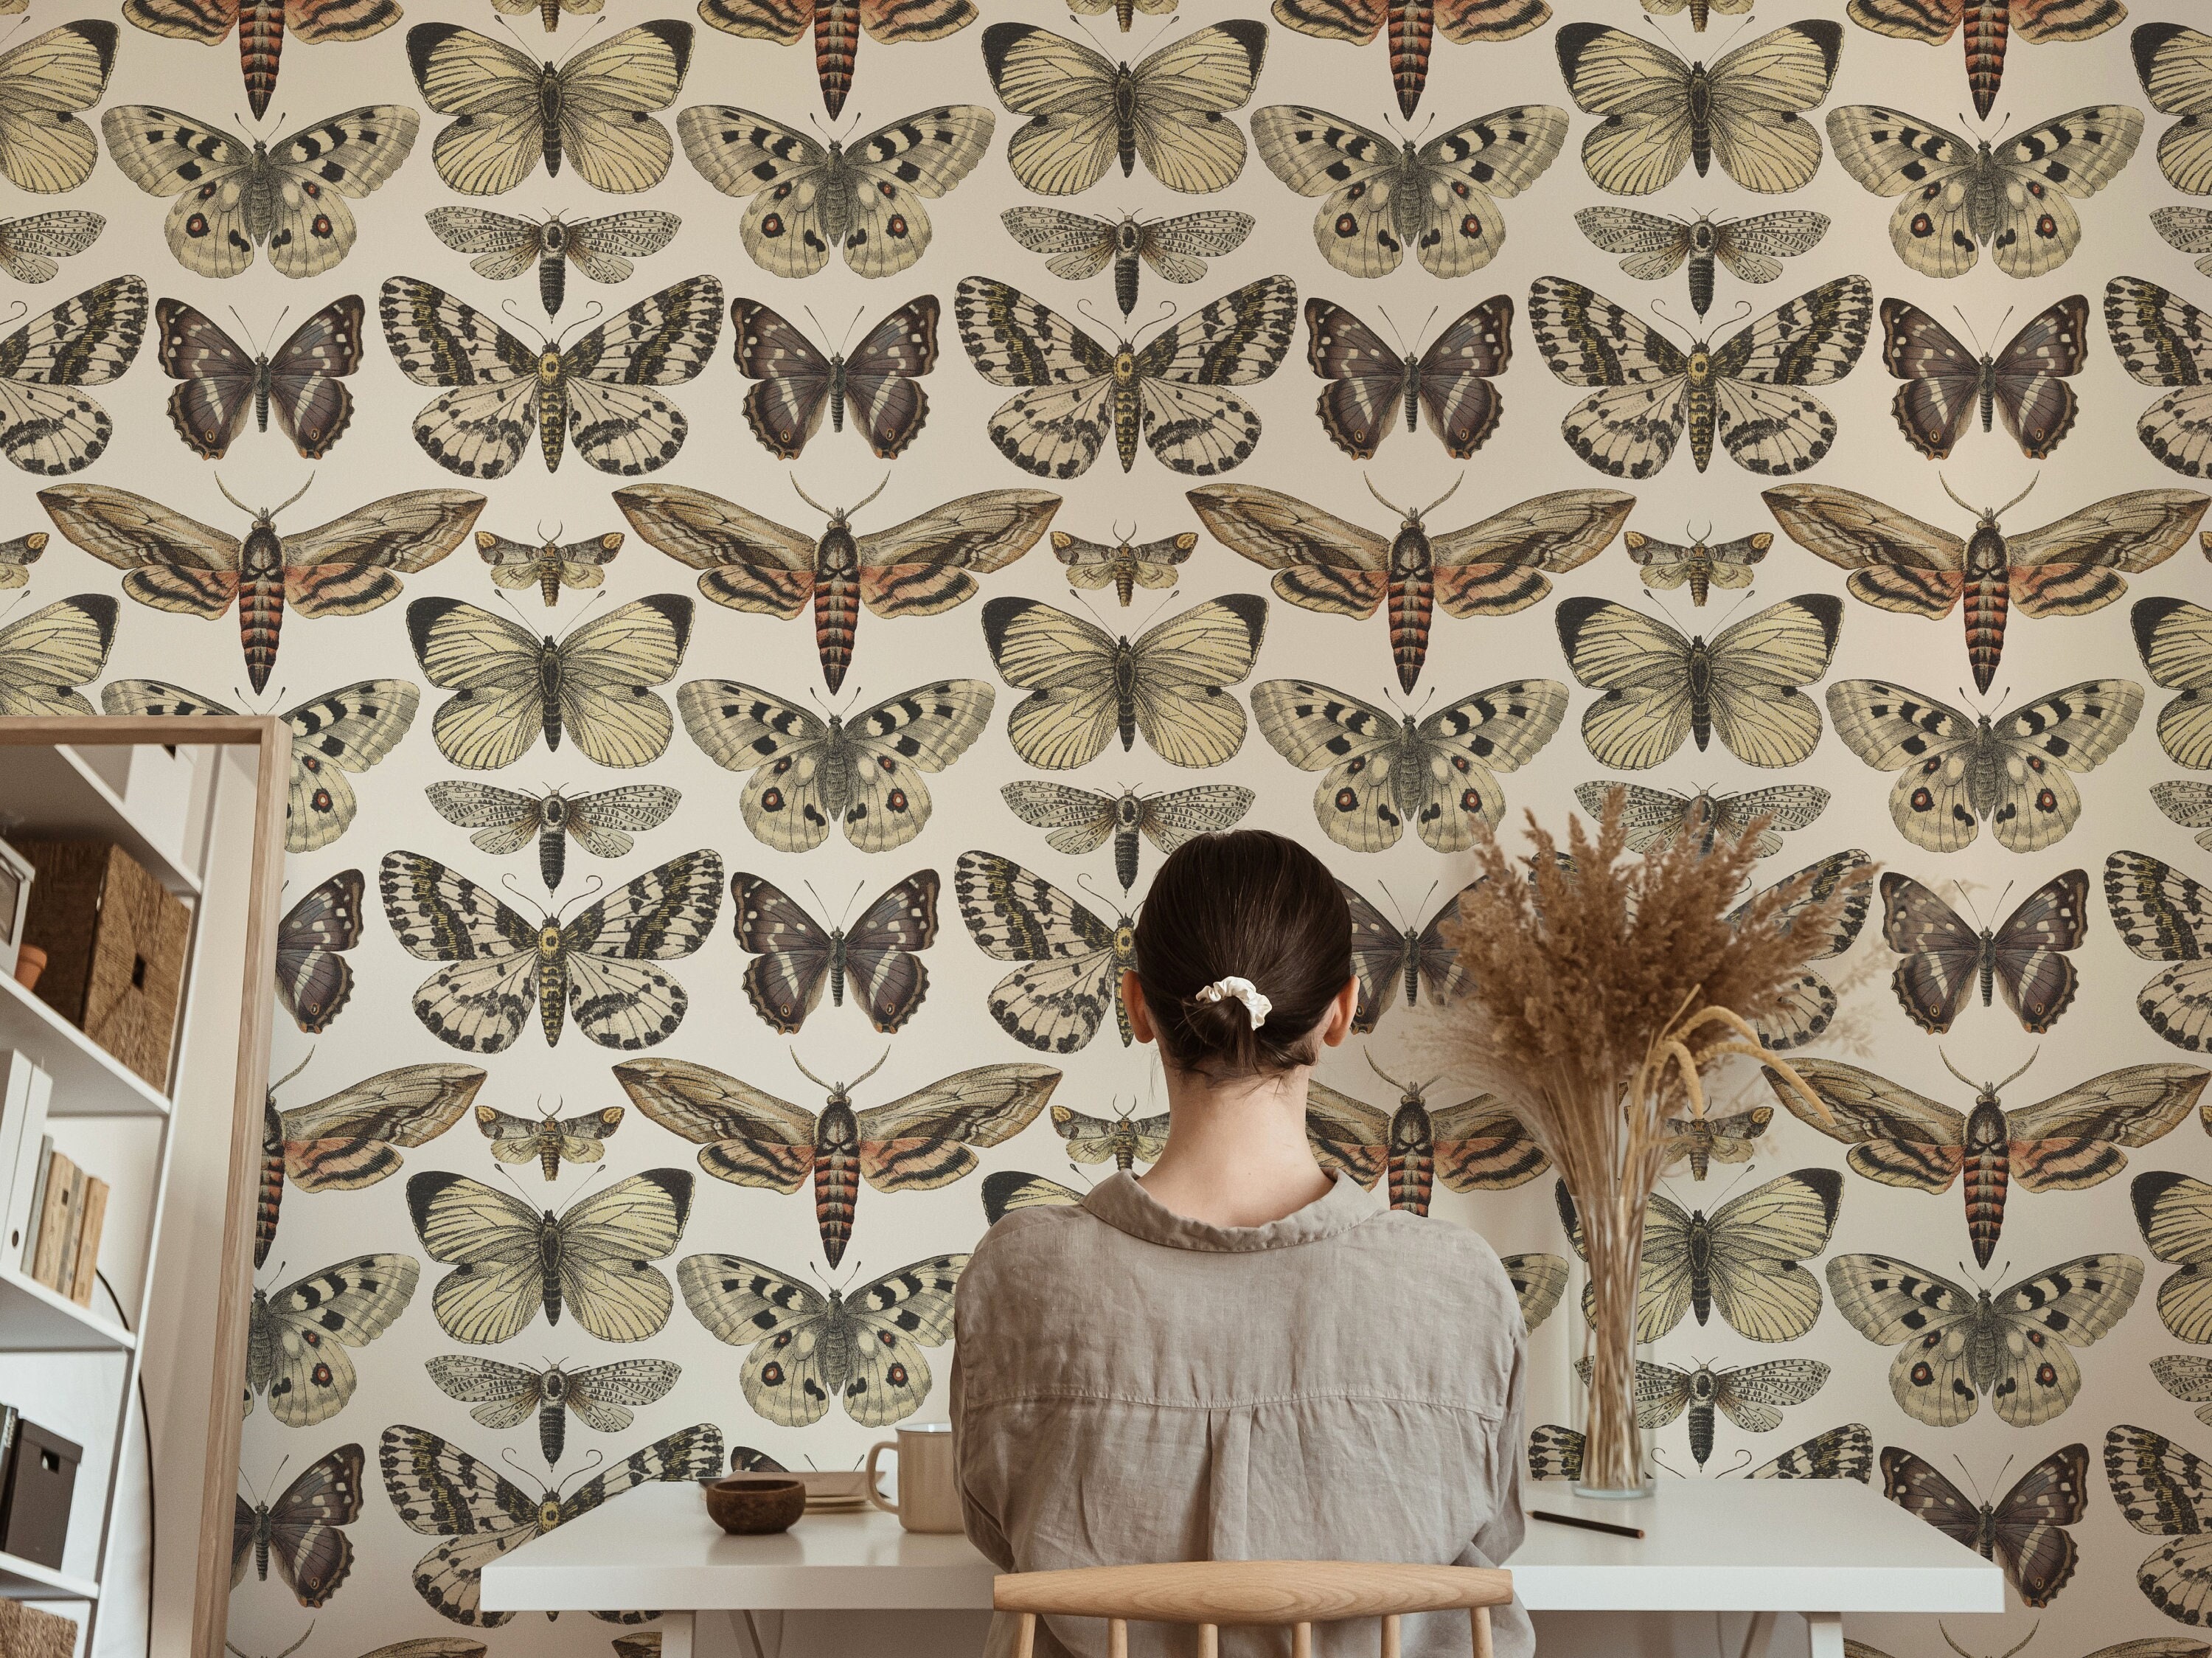 How to Prepare Your Wall for Wallpaper